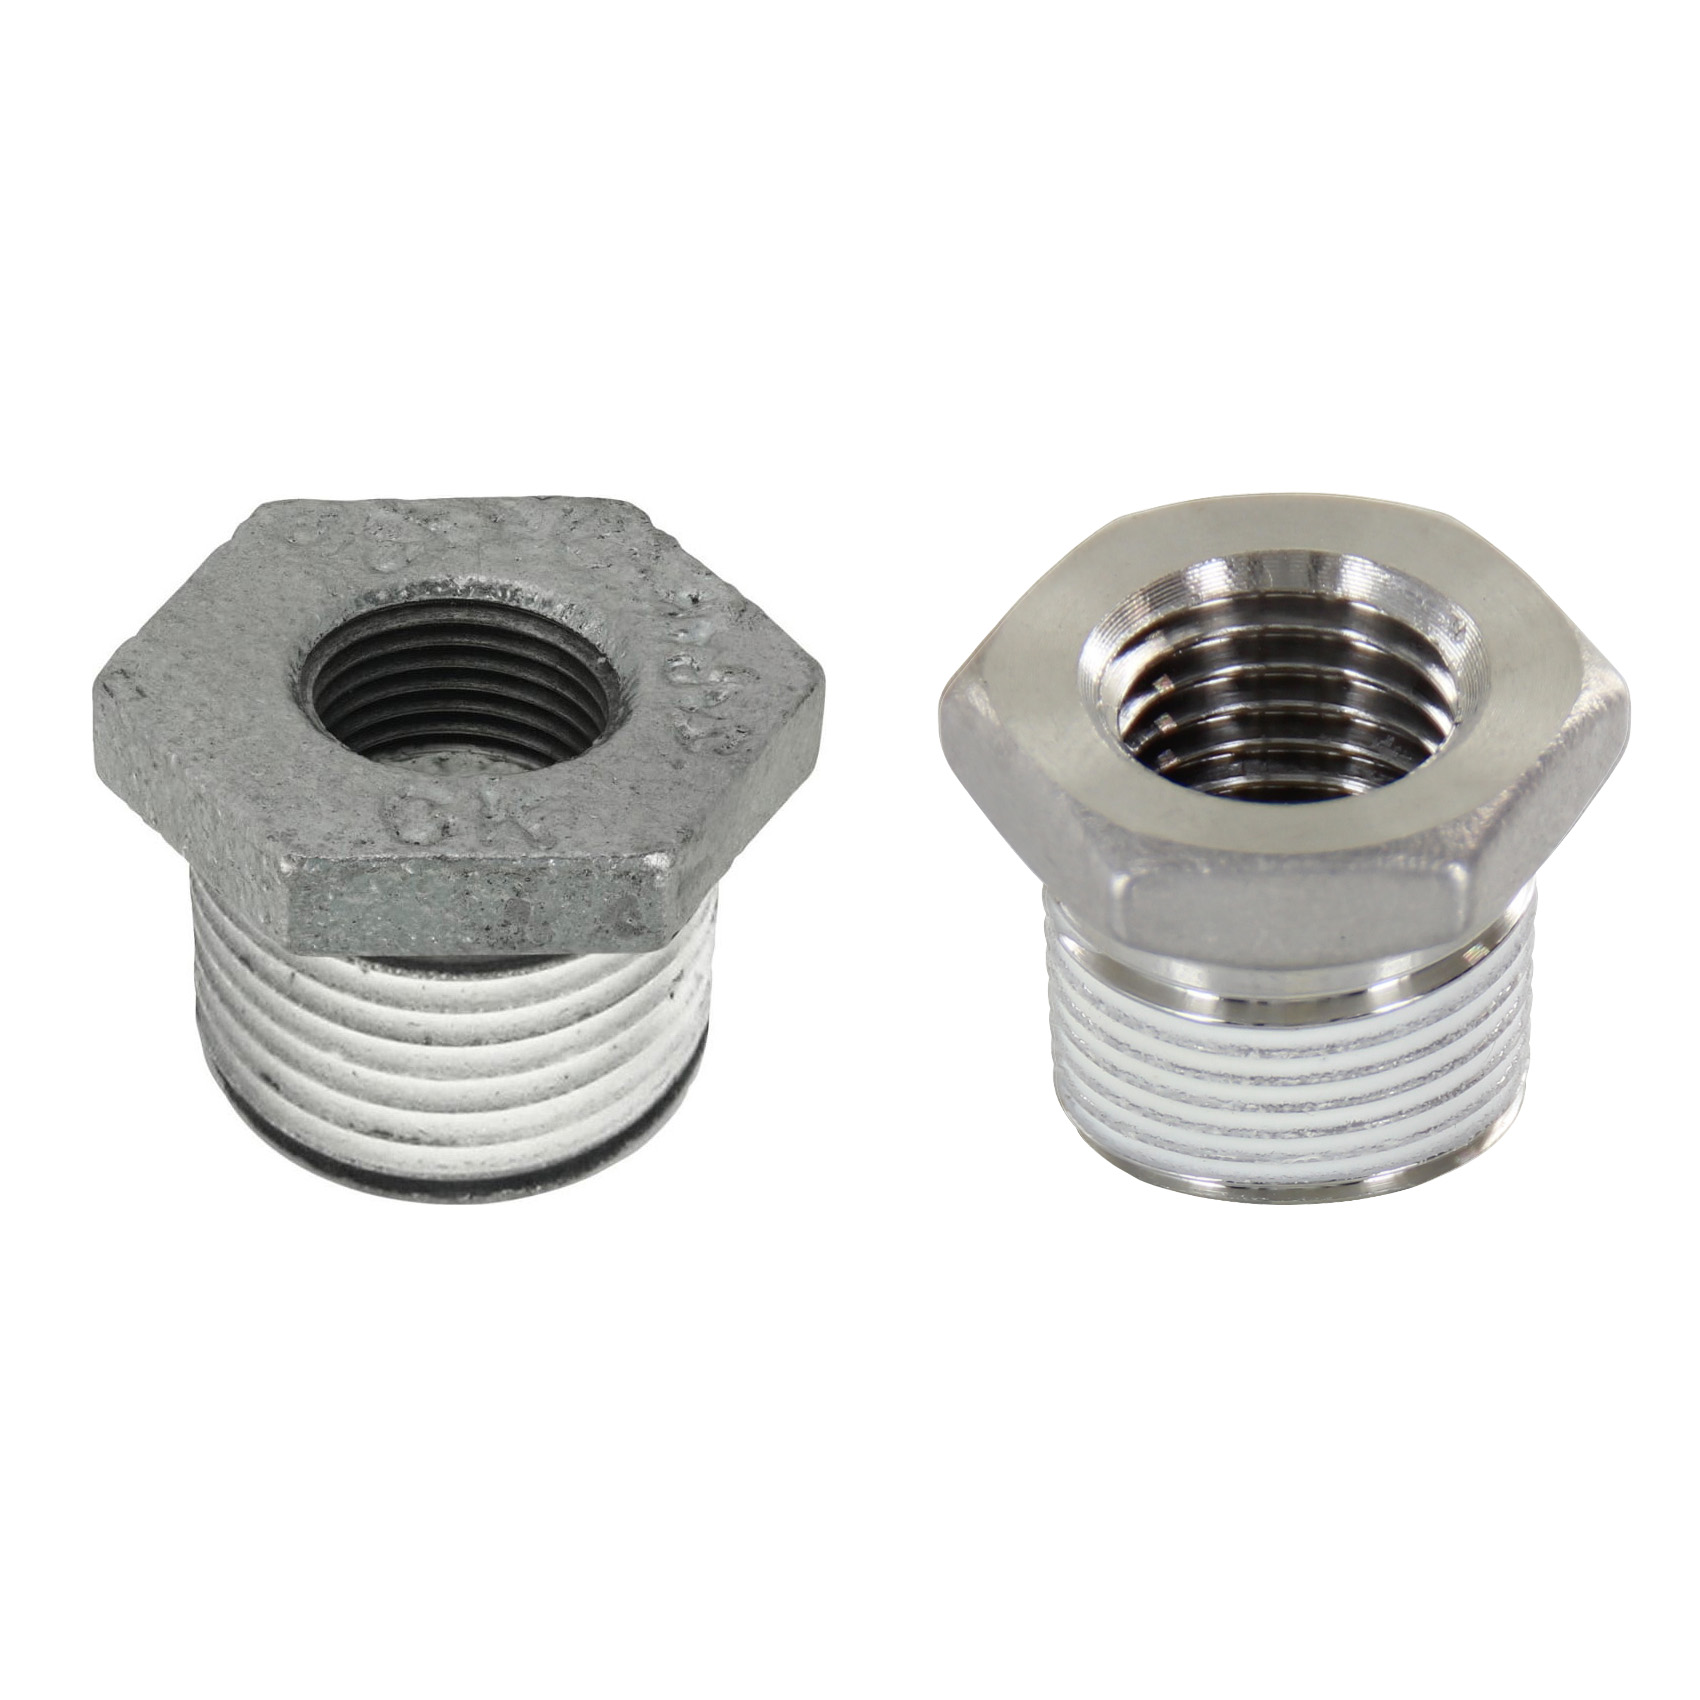 Low Pressure Fittings / With Seal Coating / Bushing SGCPB13